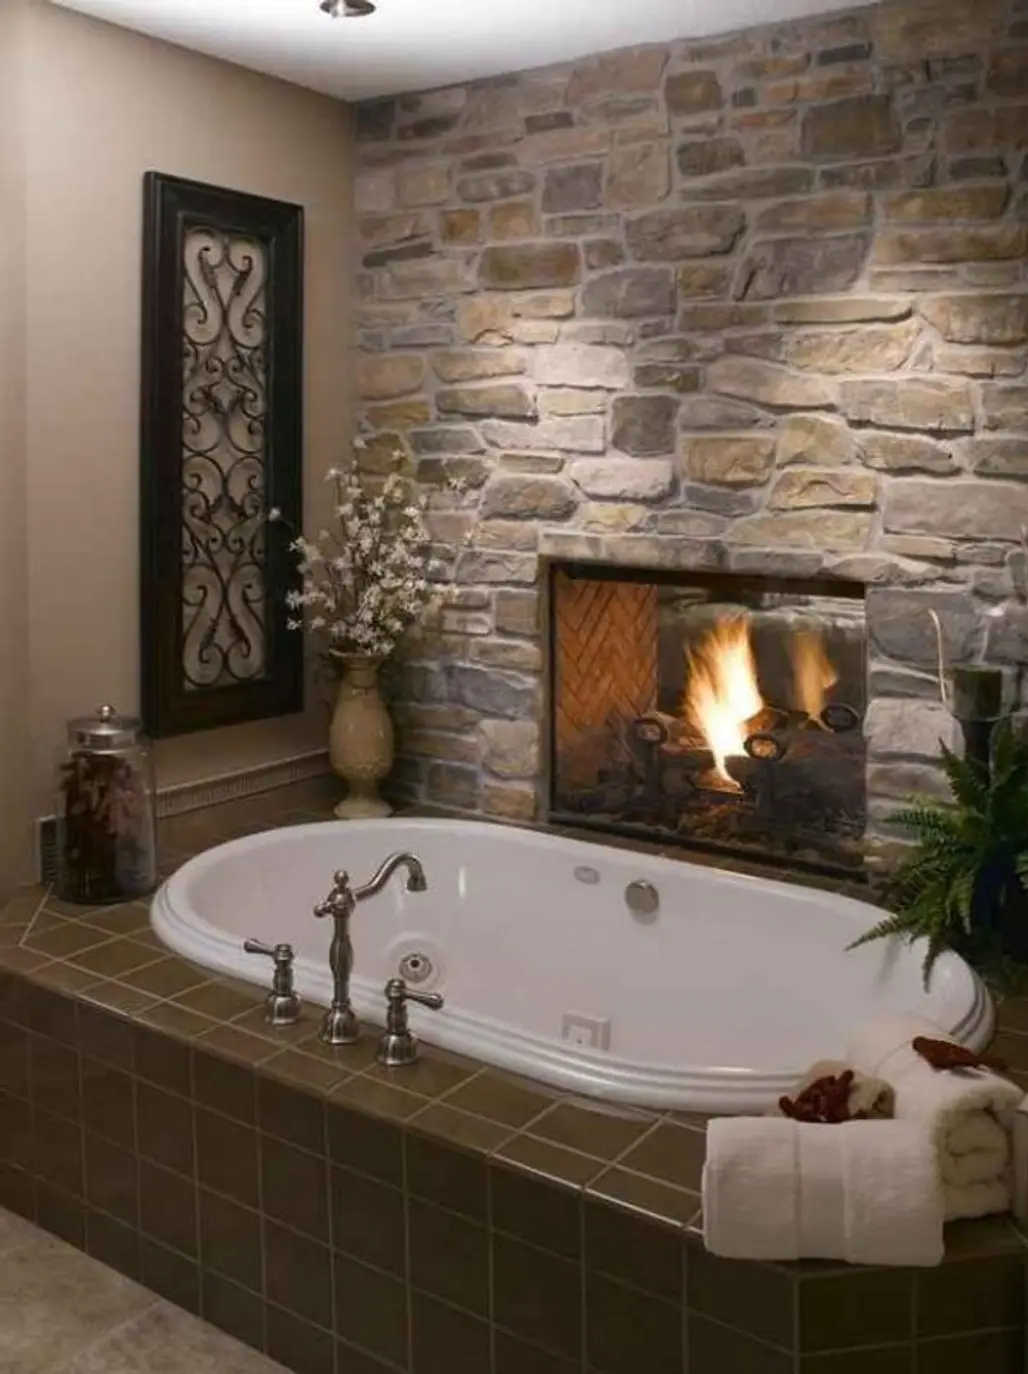 With a Two-sided Fireplace between the Bathroom and the Bedroom